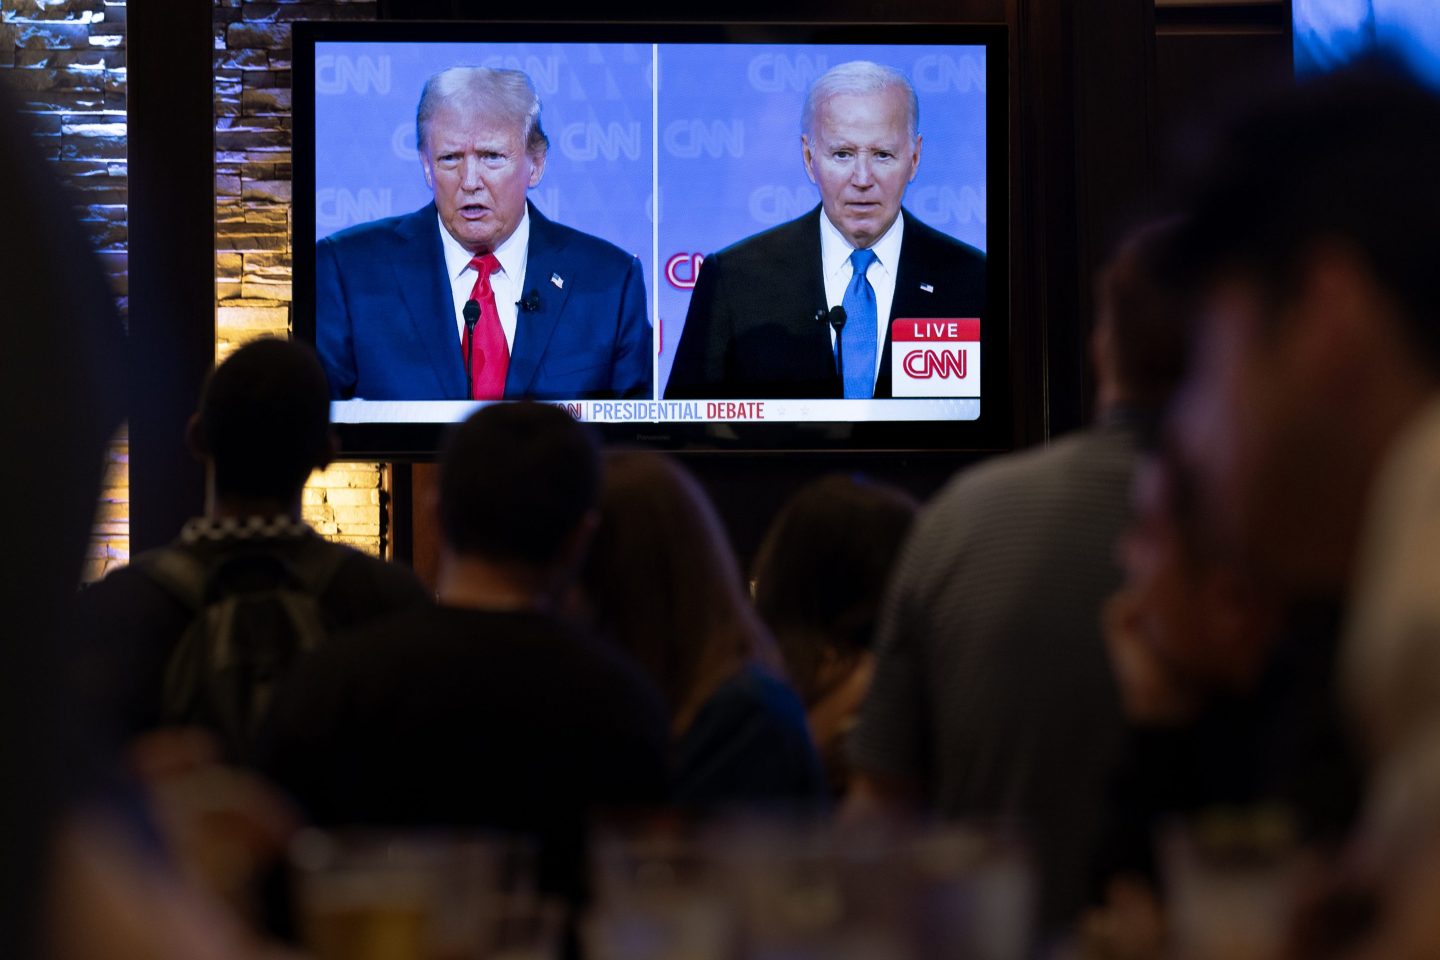 CHICAGO, ILLINOIS - JUNE 27: Guests at the Old Town Pour House watch a debate between President Joe Biden and presumptive Republican nominee former President Donald Trump on June 27, 2024 in Chicago, Illinois. The debate is the first of two scheduled between the two candidates before the November election. (Photo by Scott Olson/Getty Images)